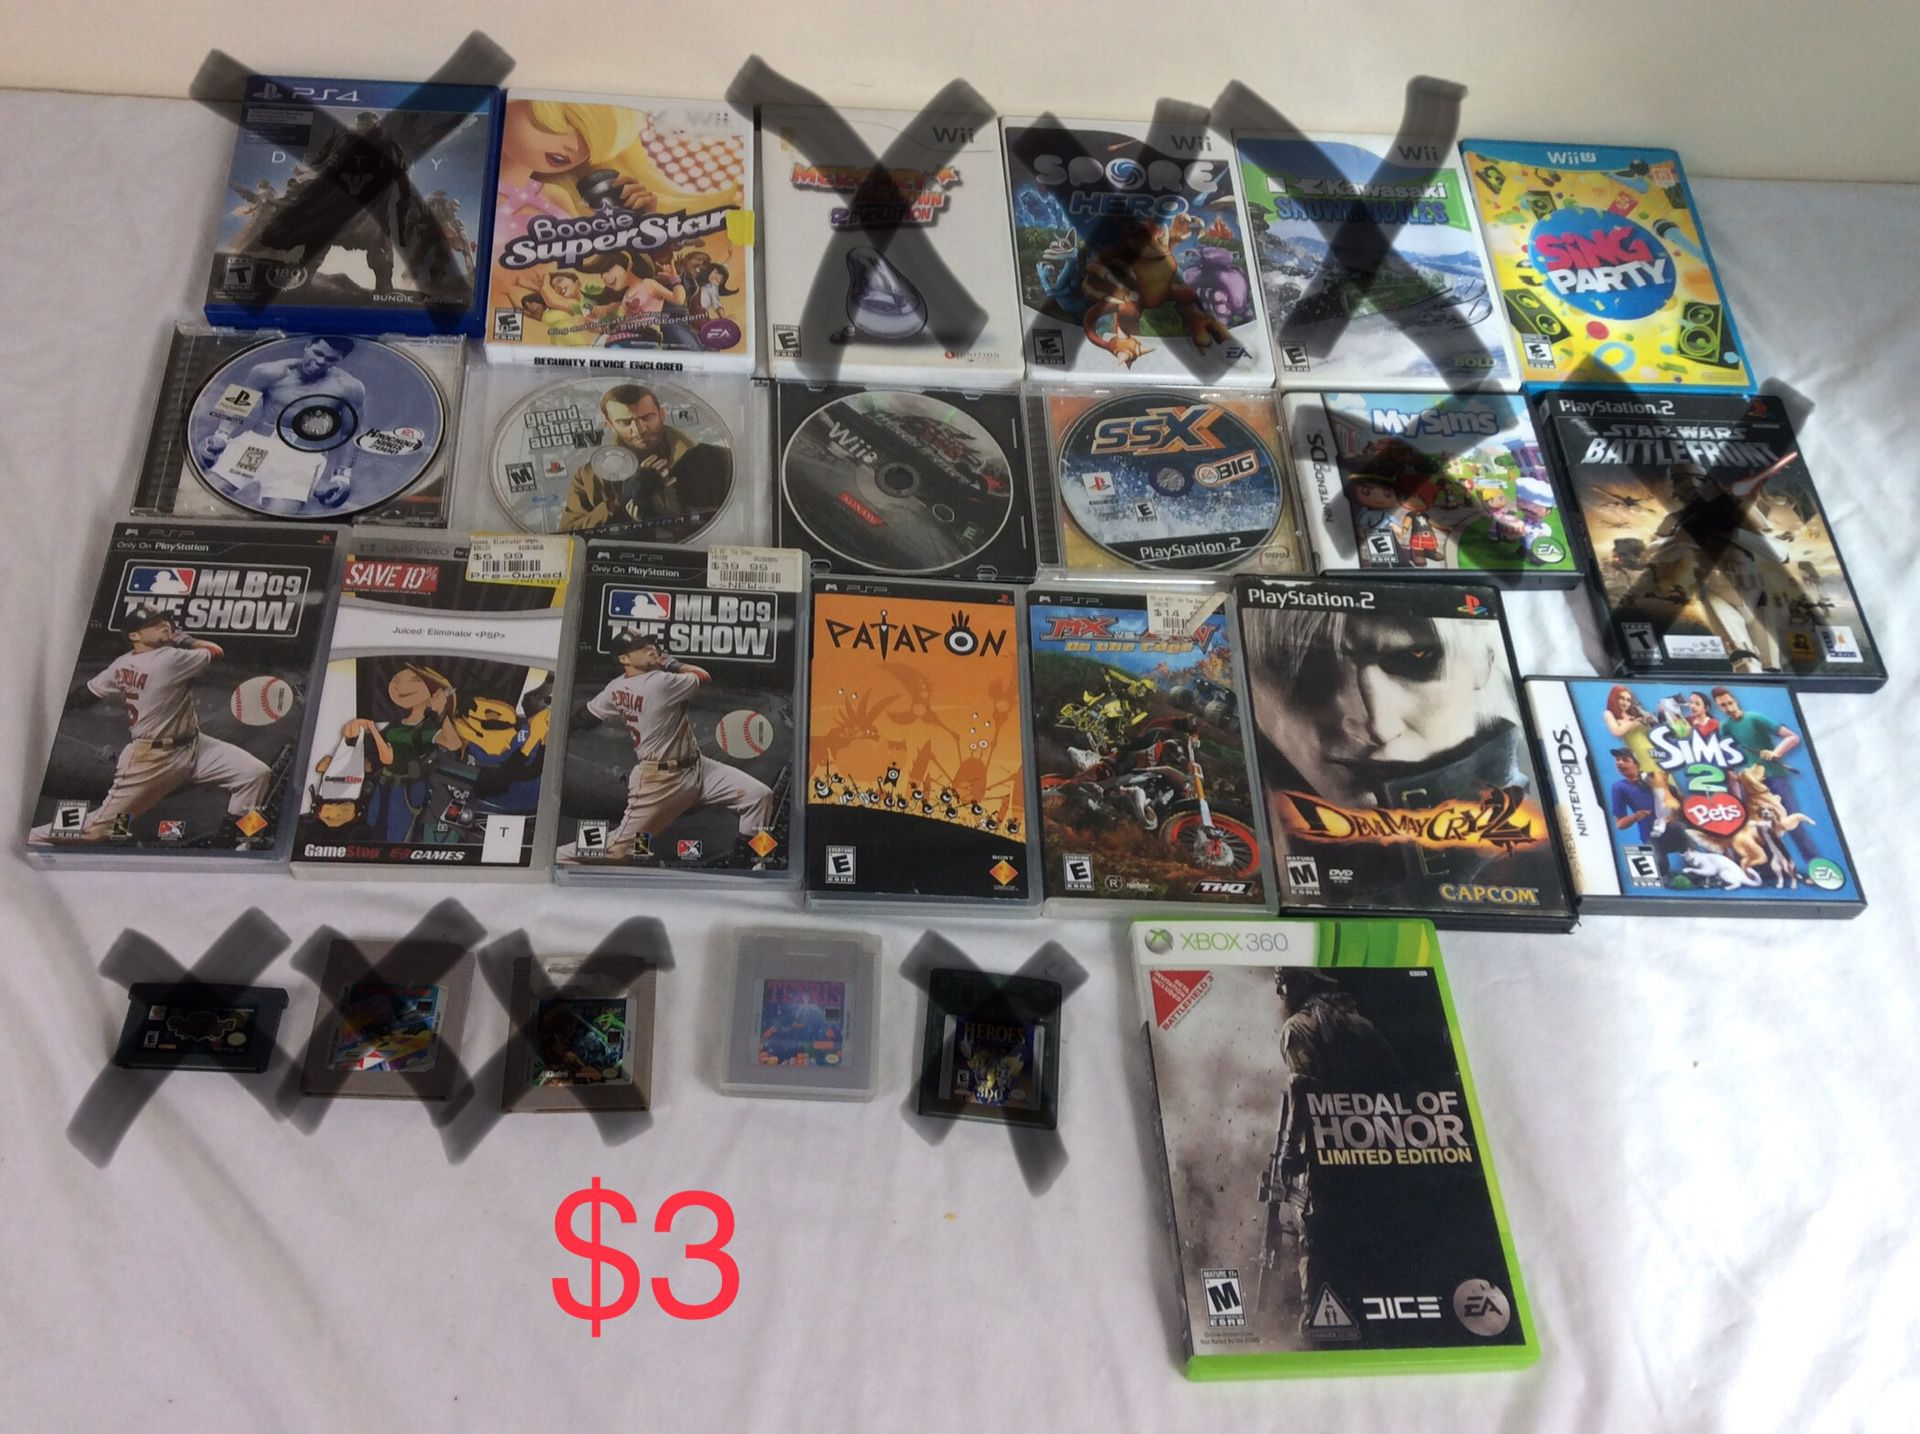 Rare Video Games for PS1,PS2,PS3, Gameboy, GameCube,Wii, Xbox 360, N64,PSP,DS